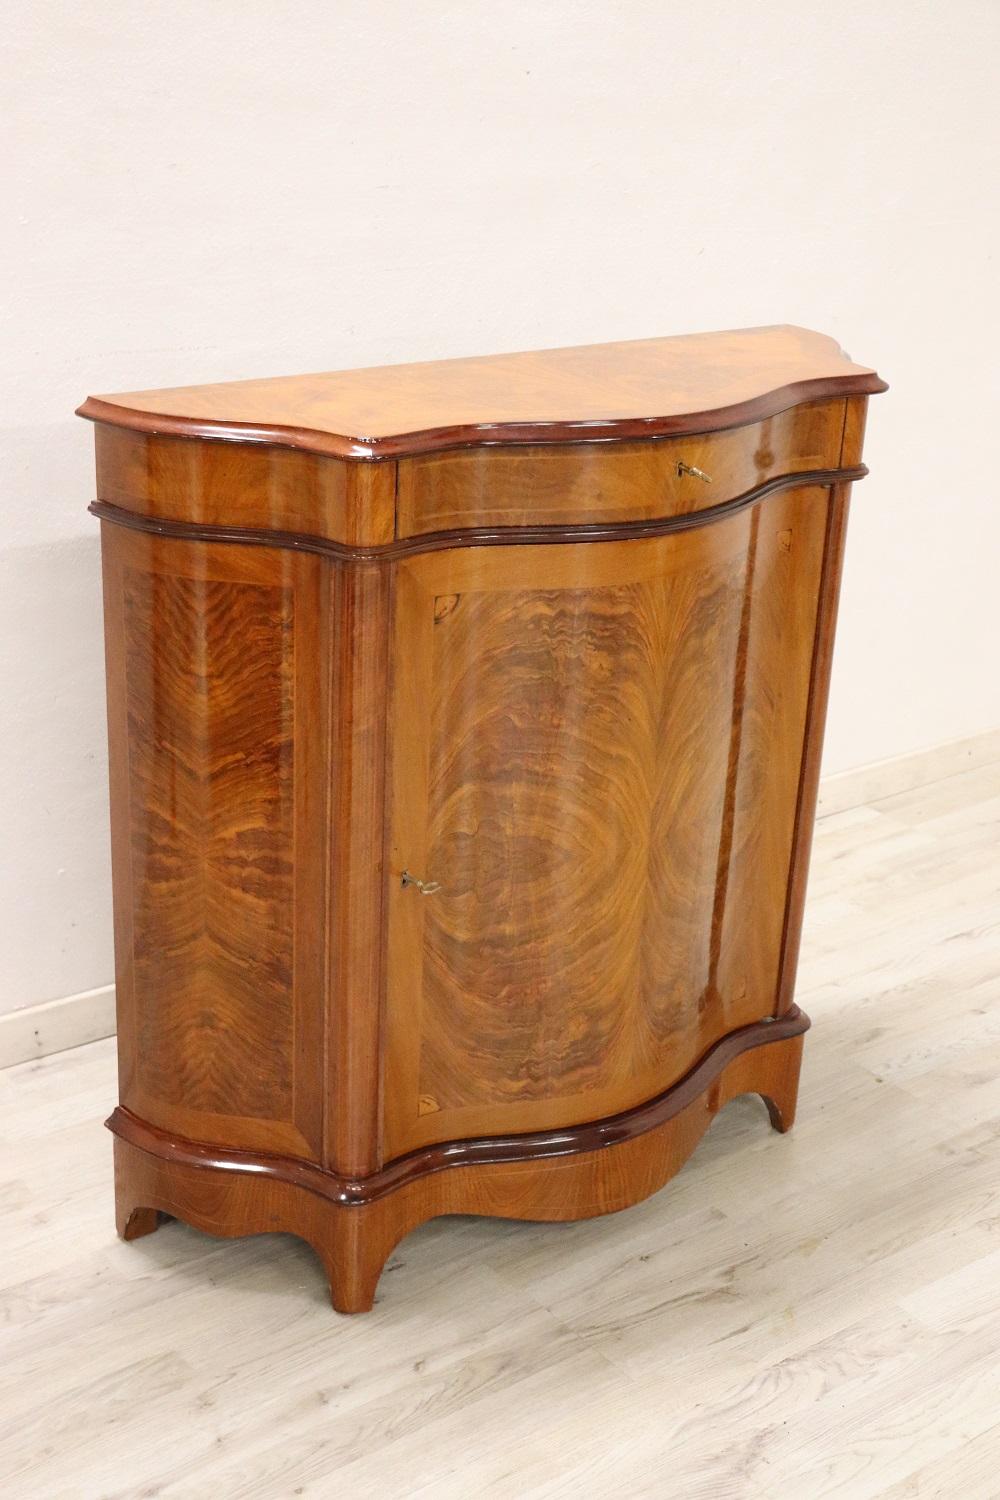 Elegant cabinet in mahogany wood, 1950s. Lots of useful internal space. A small and comfortable drawer. Particular shape on the front. Truly elegant and important for any room in the house. You will receive this cabinet in peerfect conditions, ready